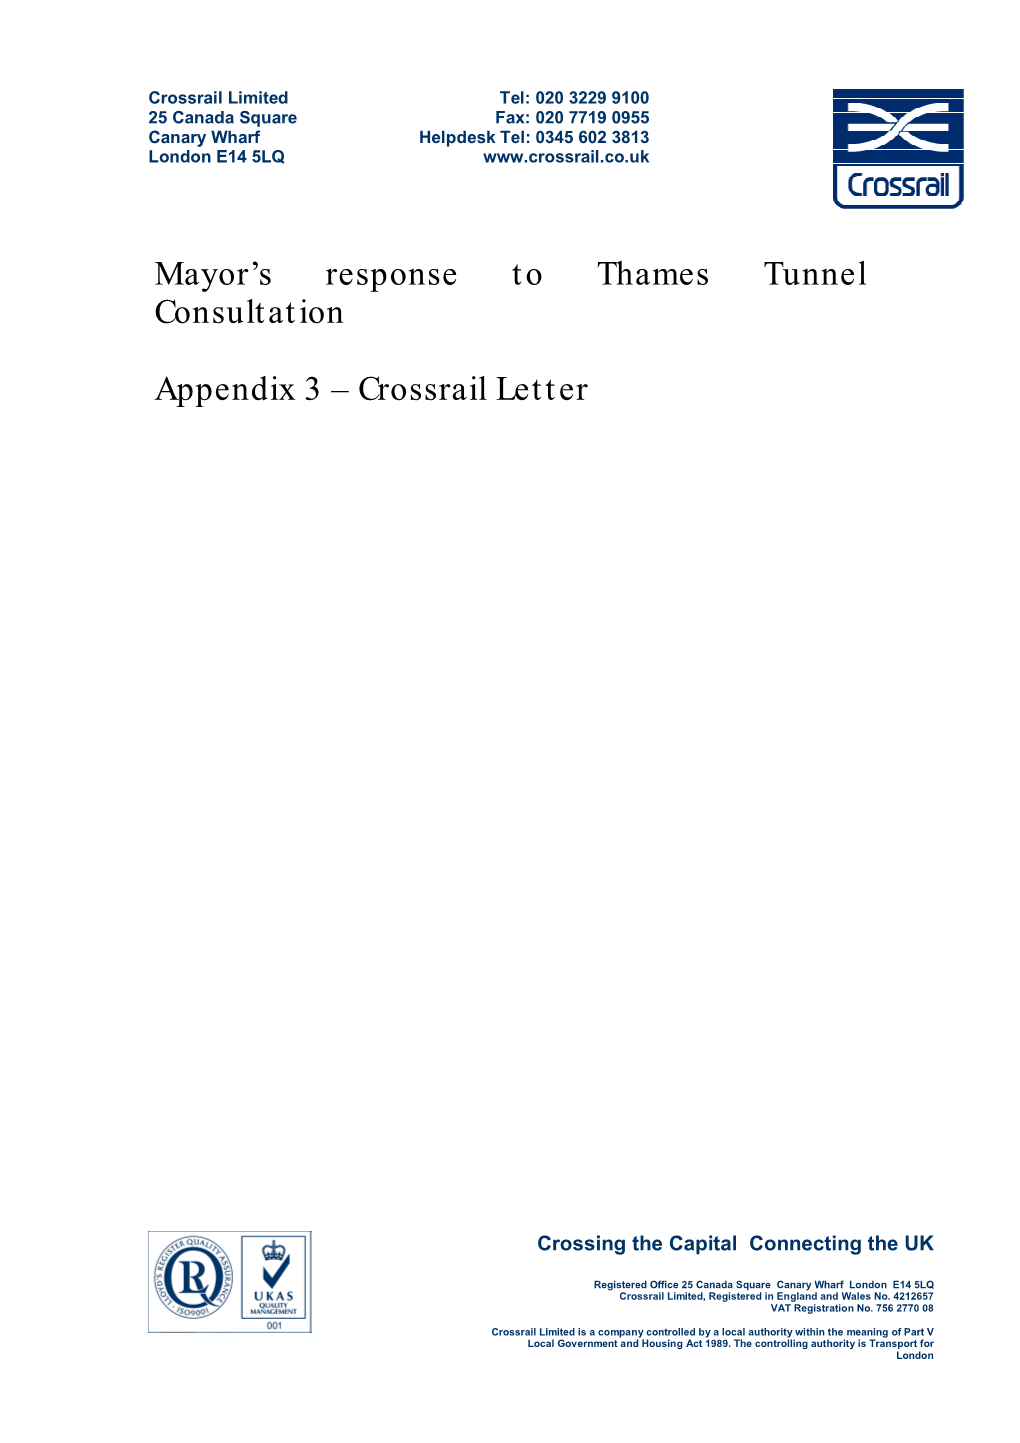 Mayor's Response to Thames Tunnel Consultation